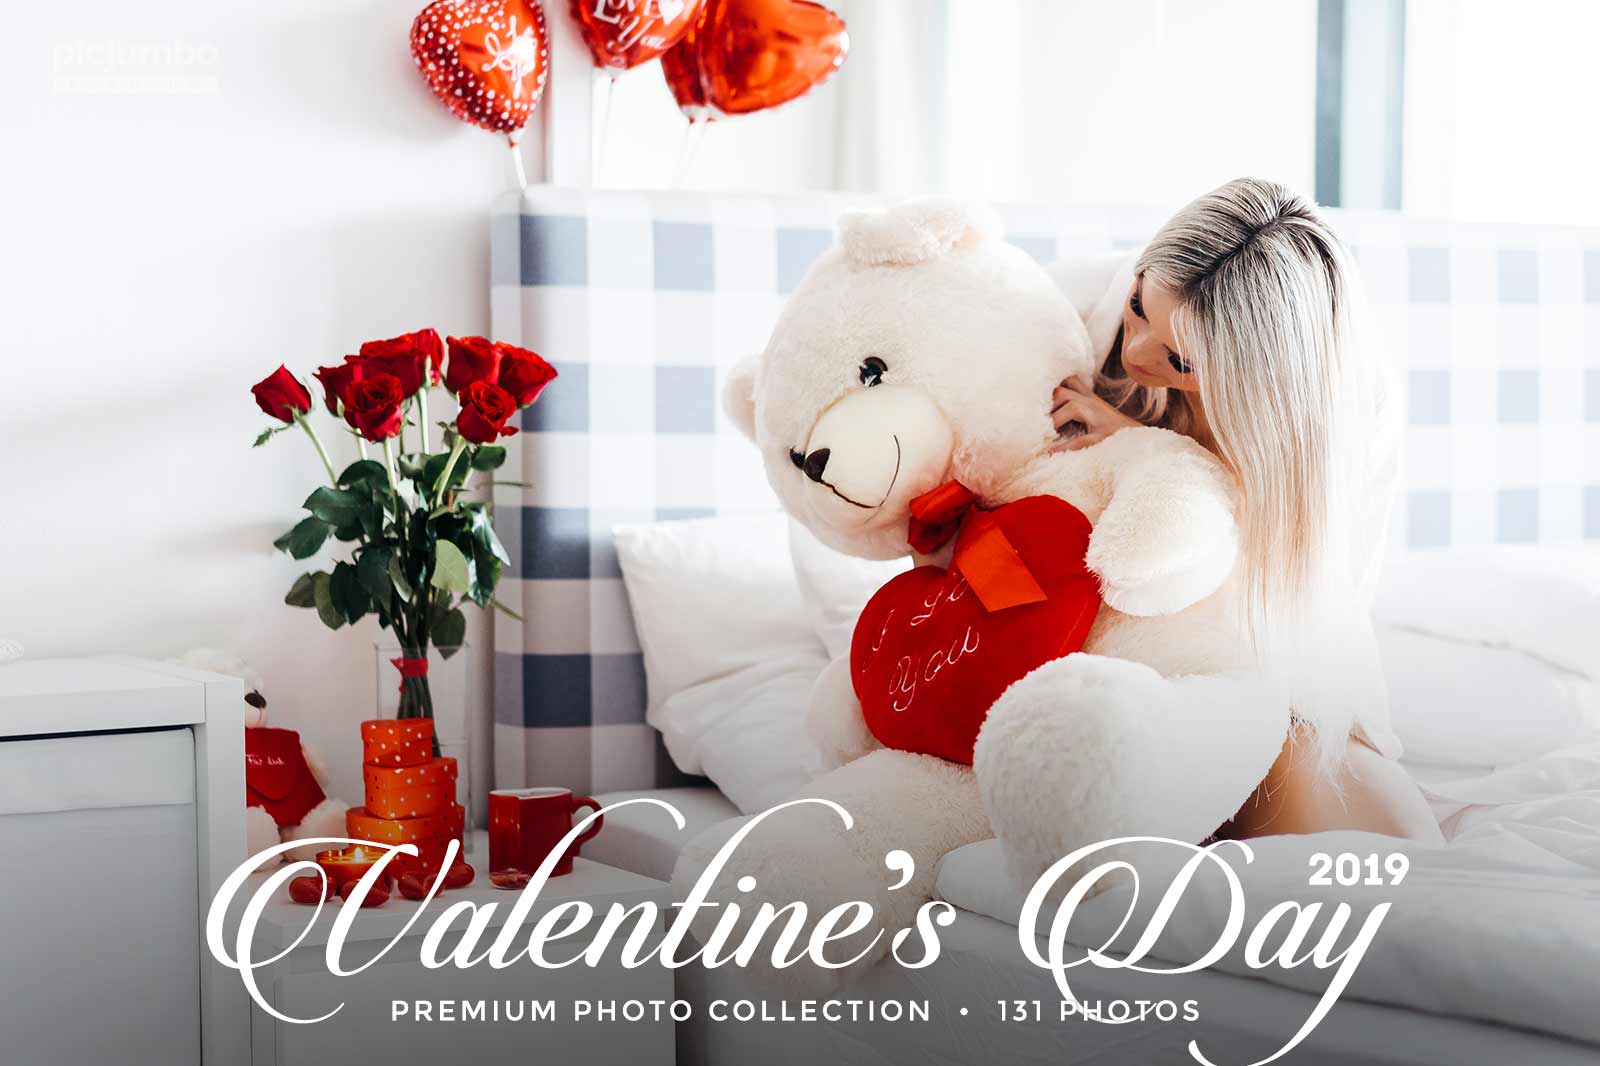 Download hi-res stock photos from our Valentine’s Day Vol. 2 PREMIUM Collection!